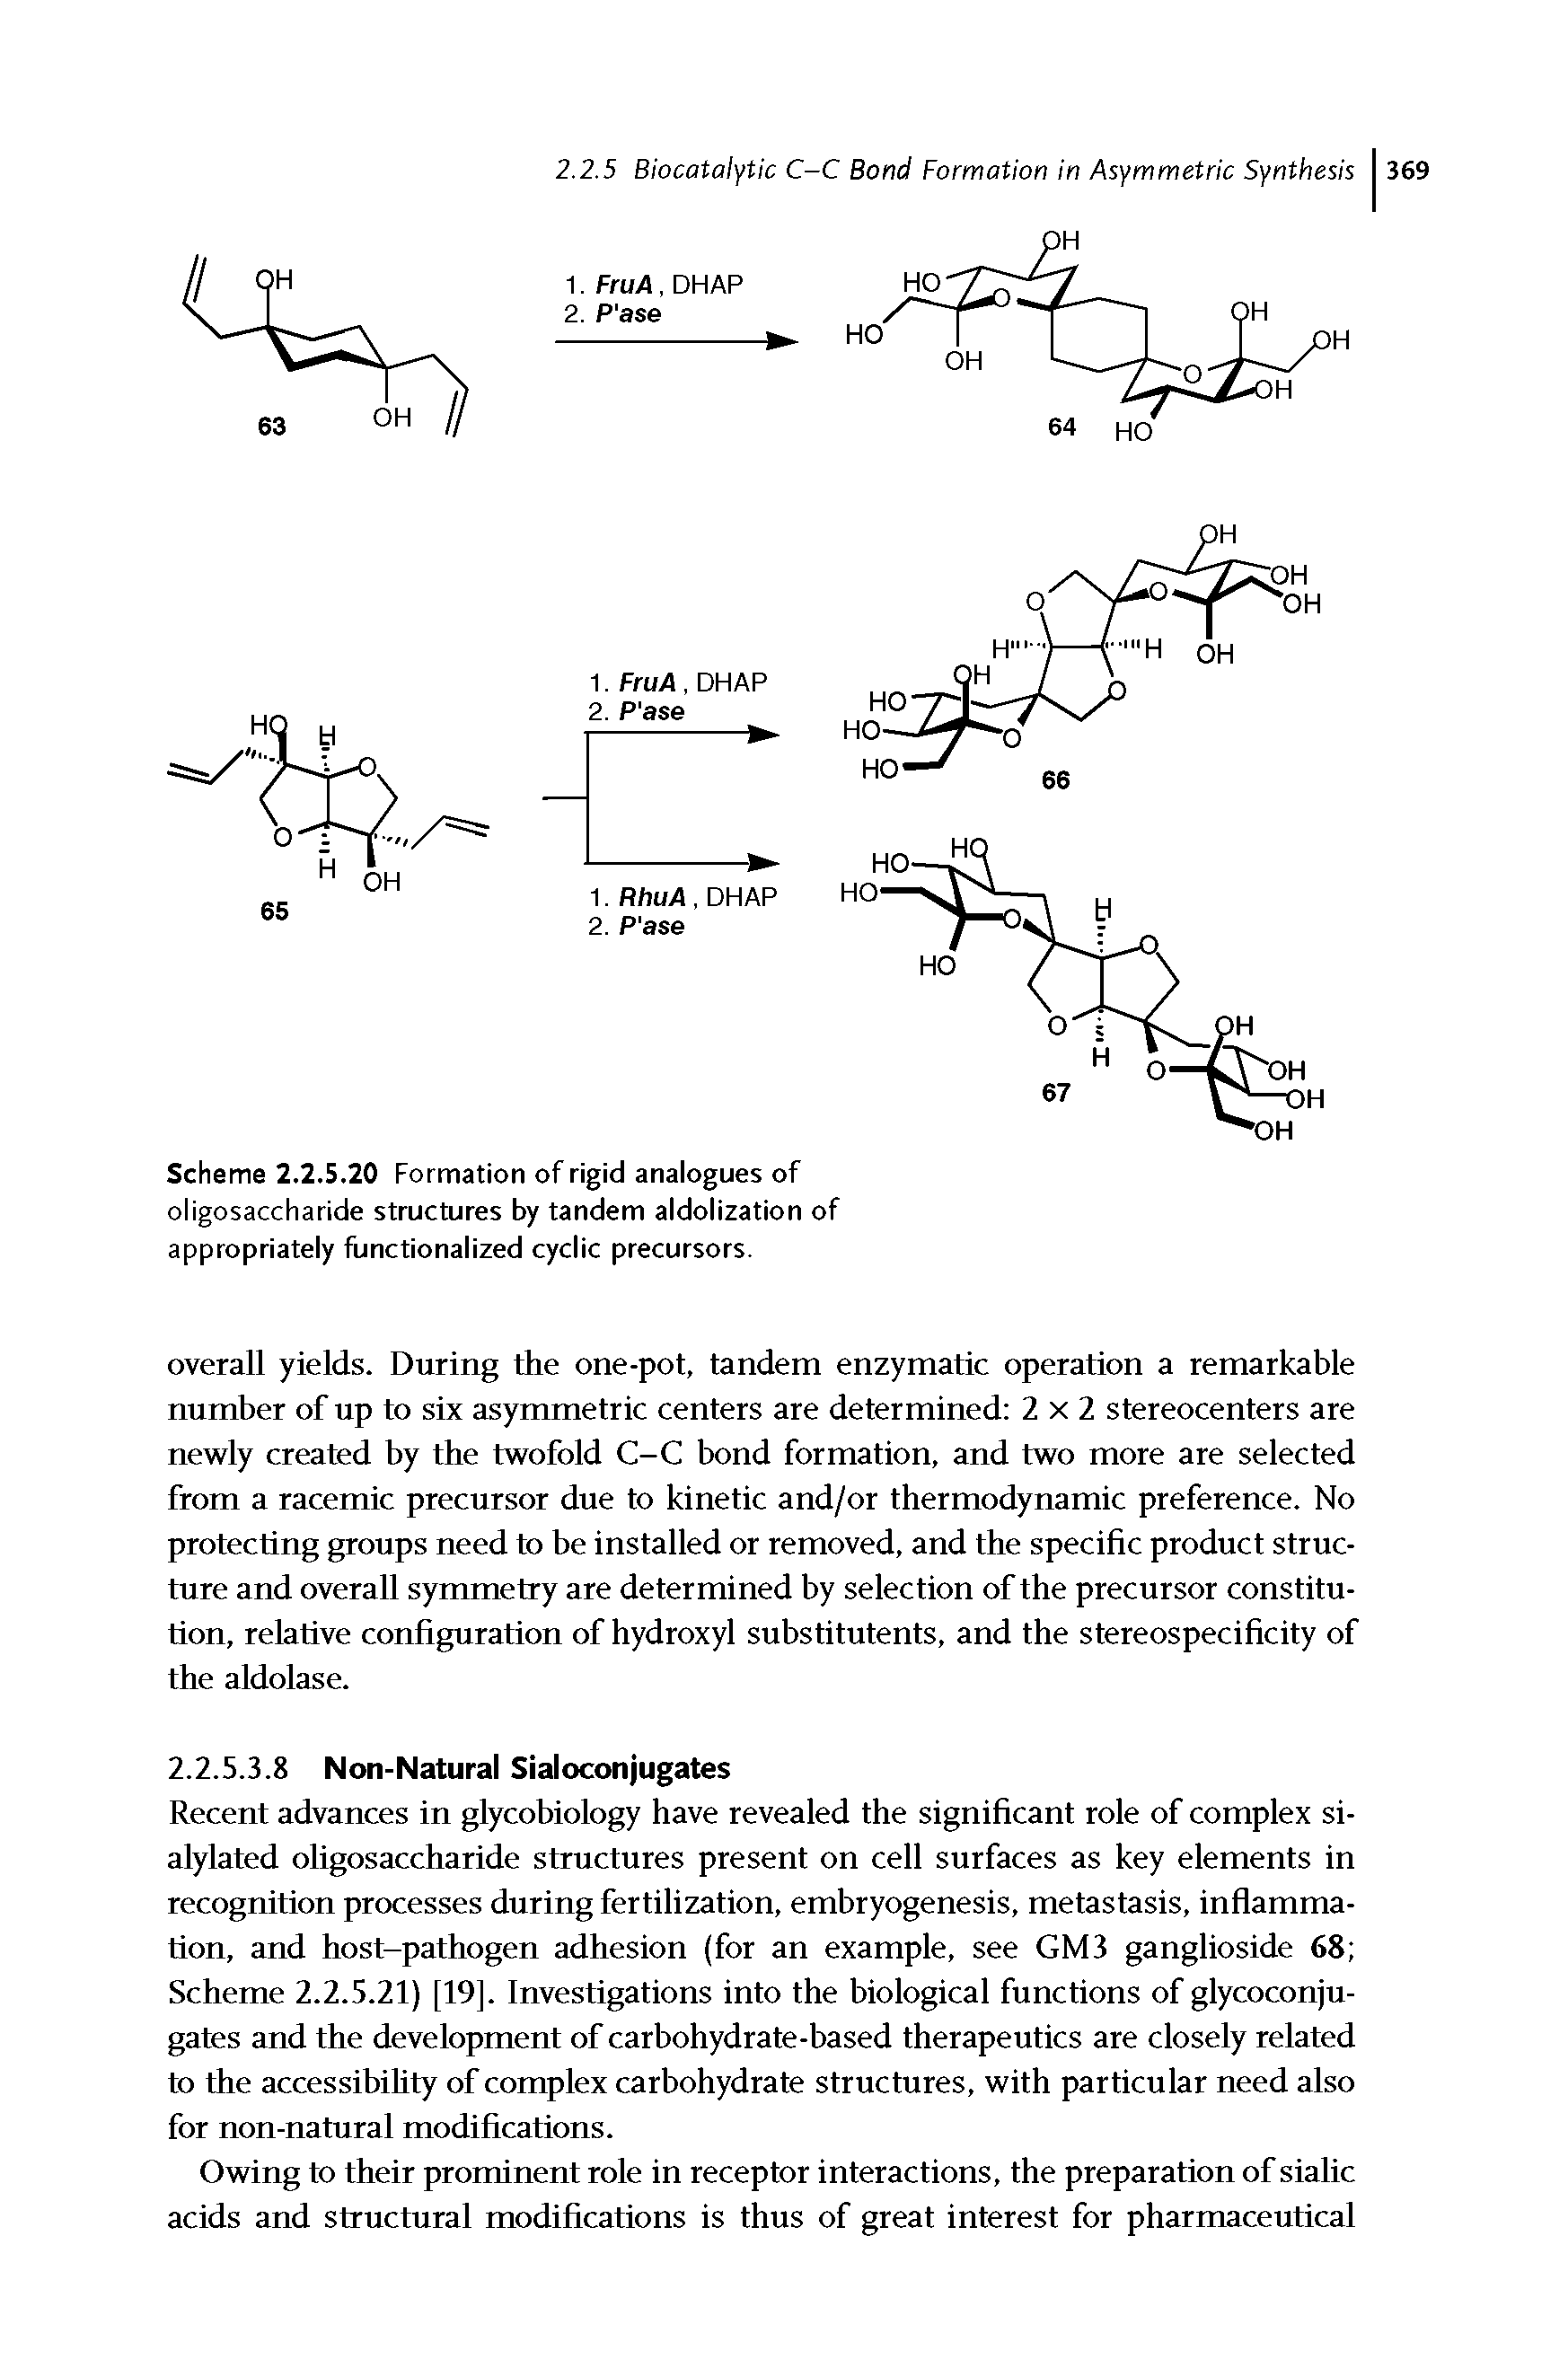 Scheme 2.2.5.20 Formation of rigid analogues of oligosaccharide structures by tandem aldolization of appropriately functionalized cyclic precursors.